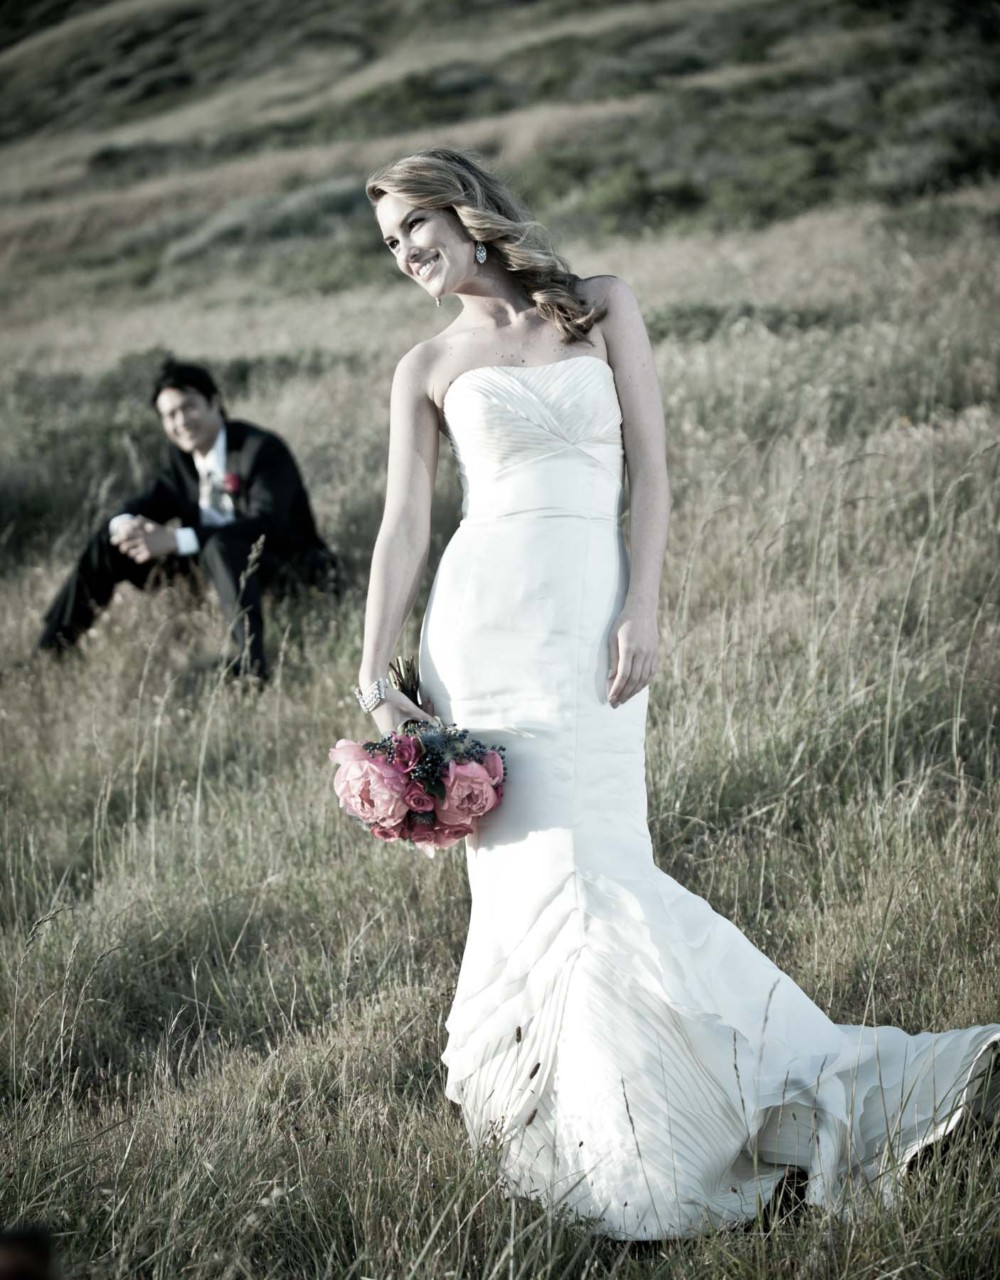 Looking for a top-rated wedding photographer in ?